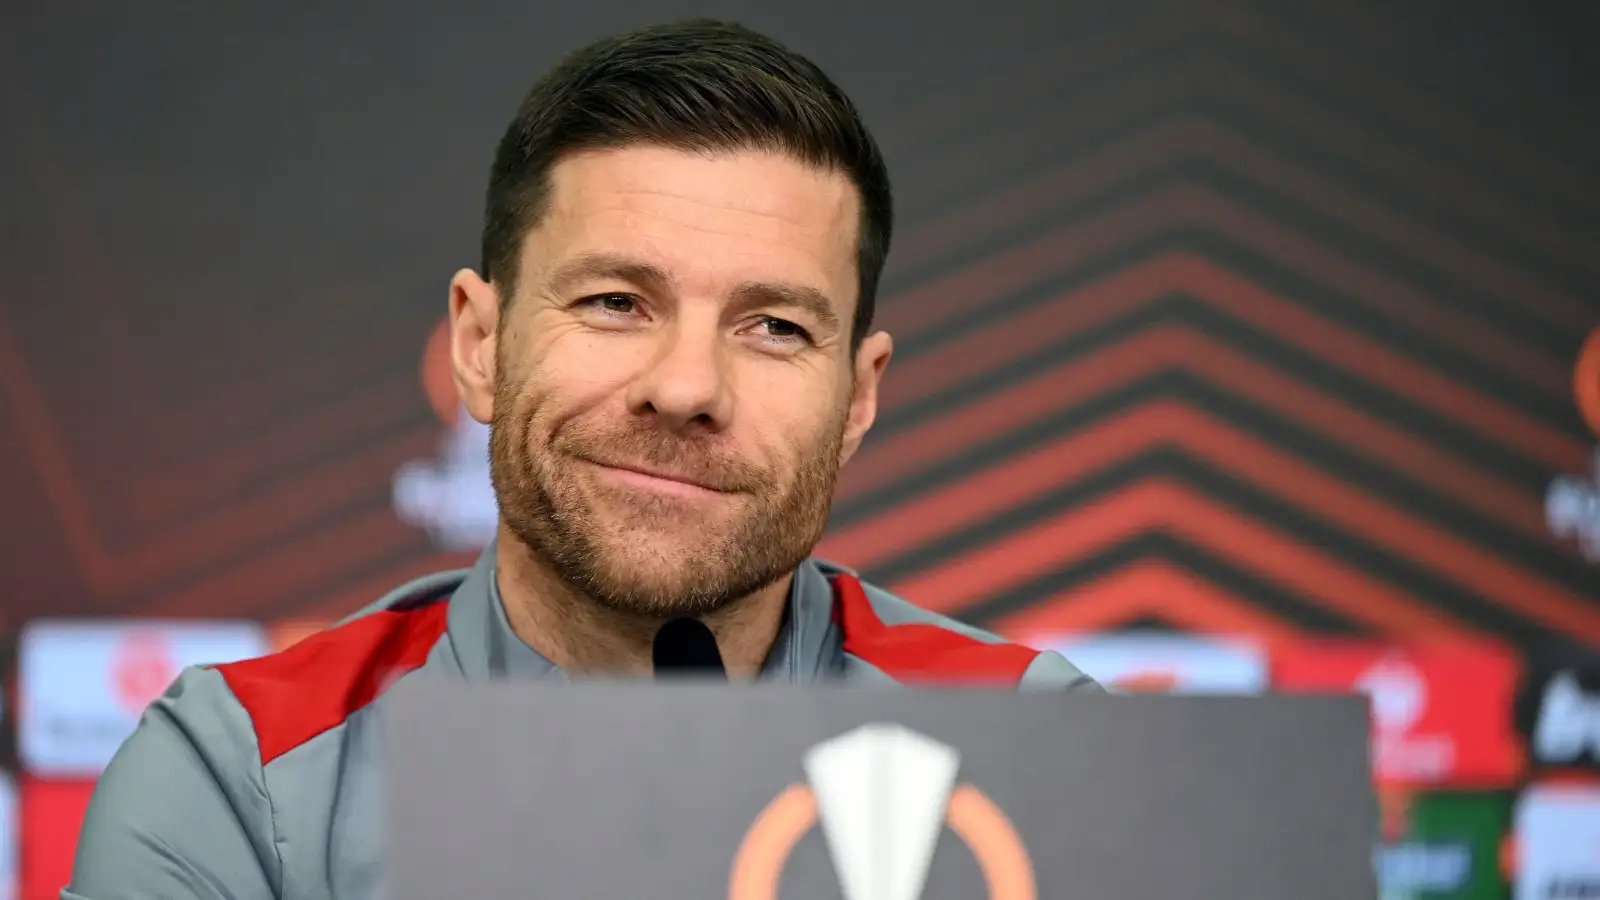 Liverpool manager target Xabi Alonso